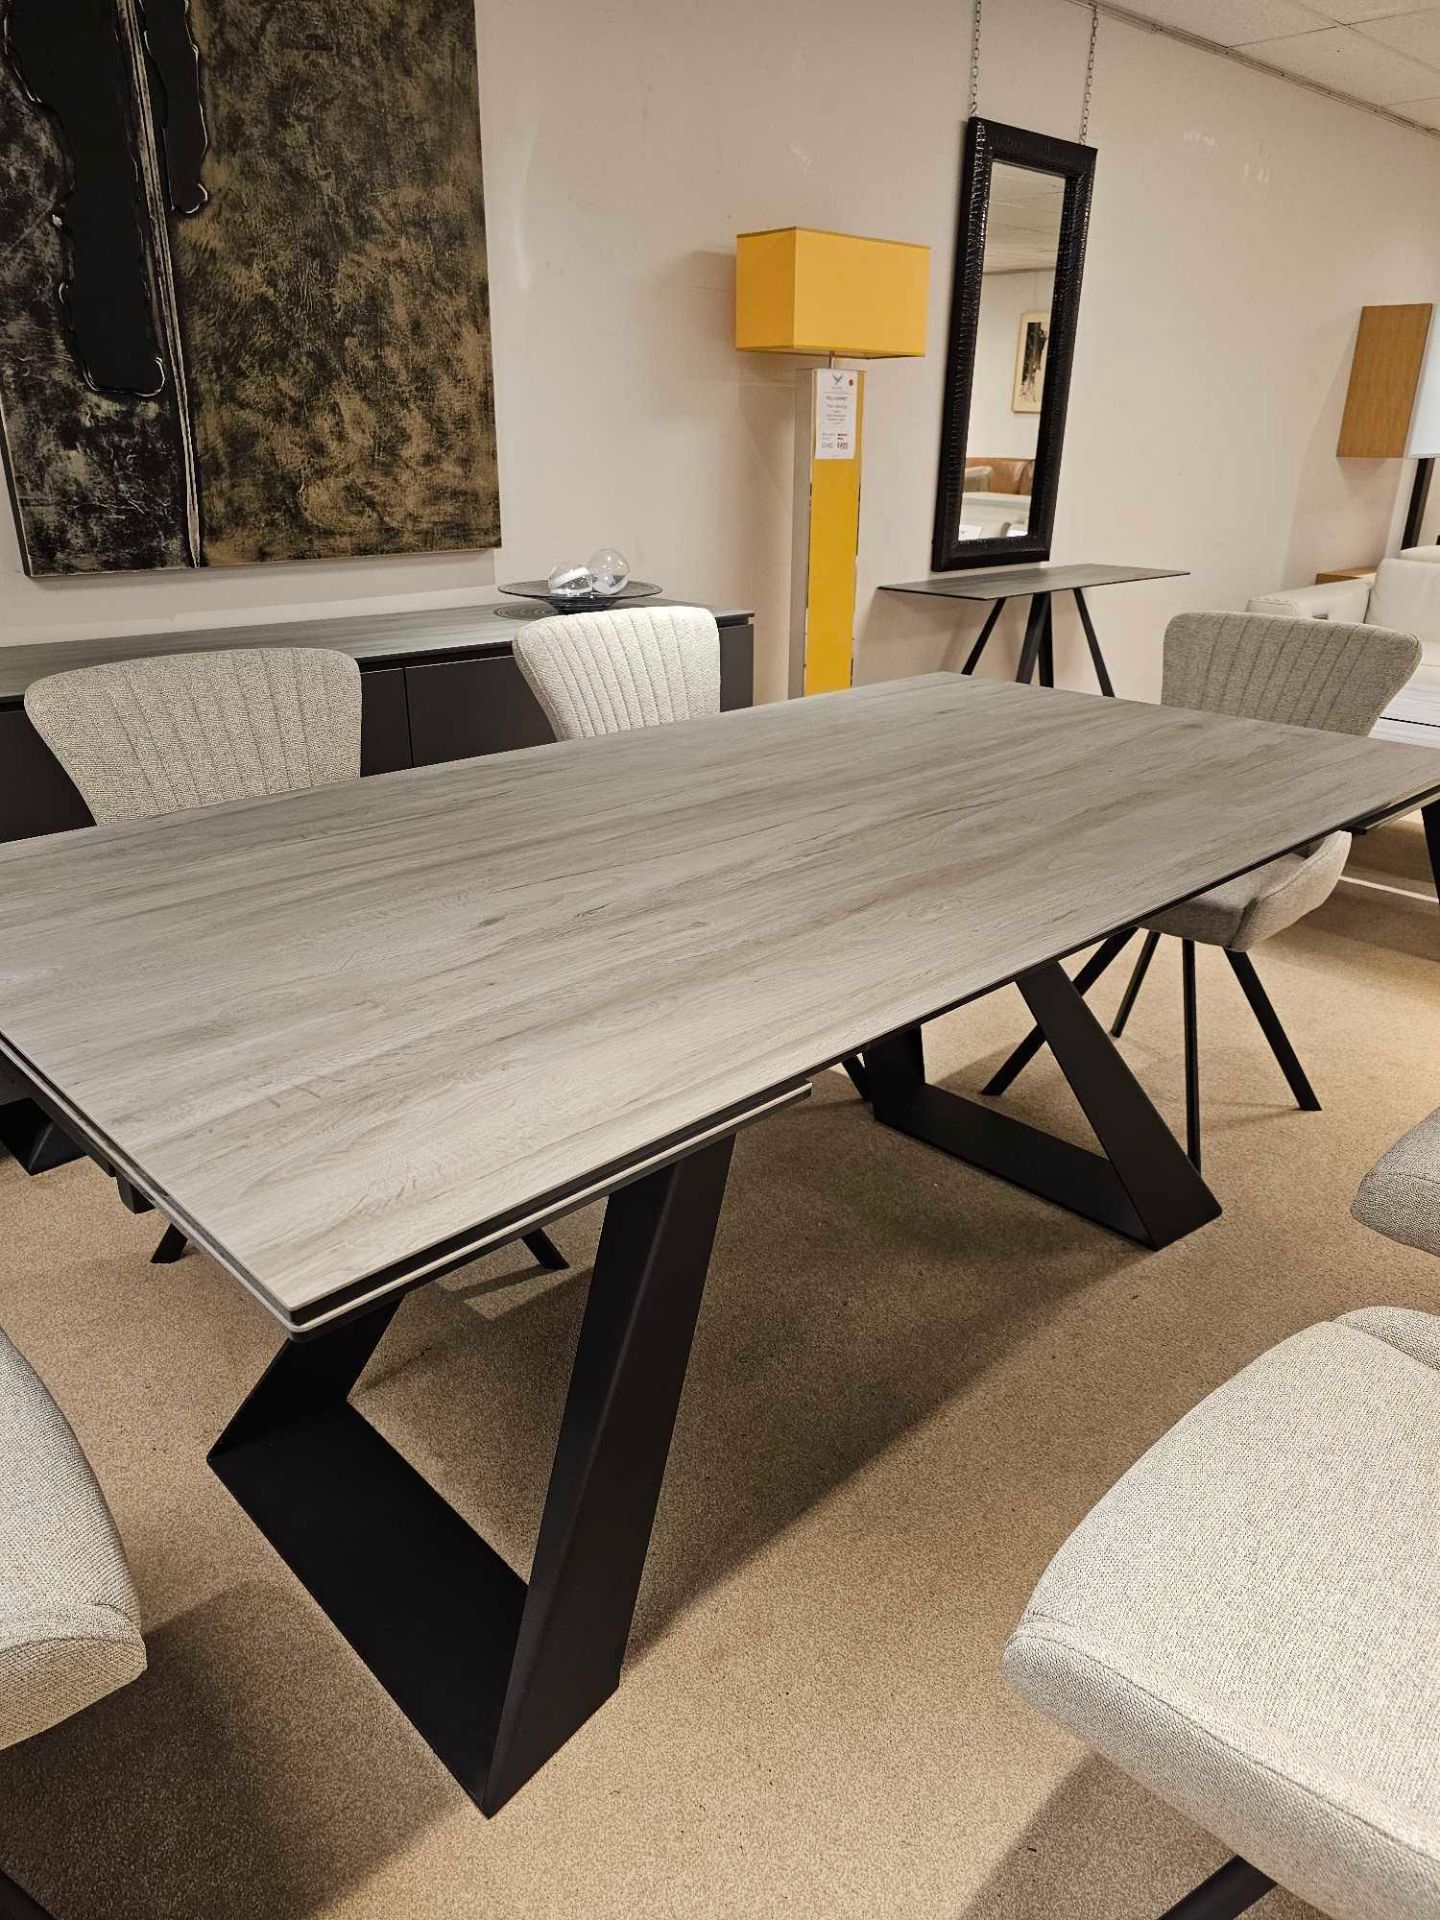 Spartan Dining Table by Kesterport The Spartan Dining Table is part of a sophisticated collection of - Image 7 of 12